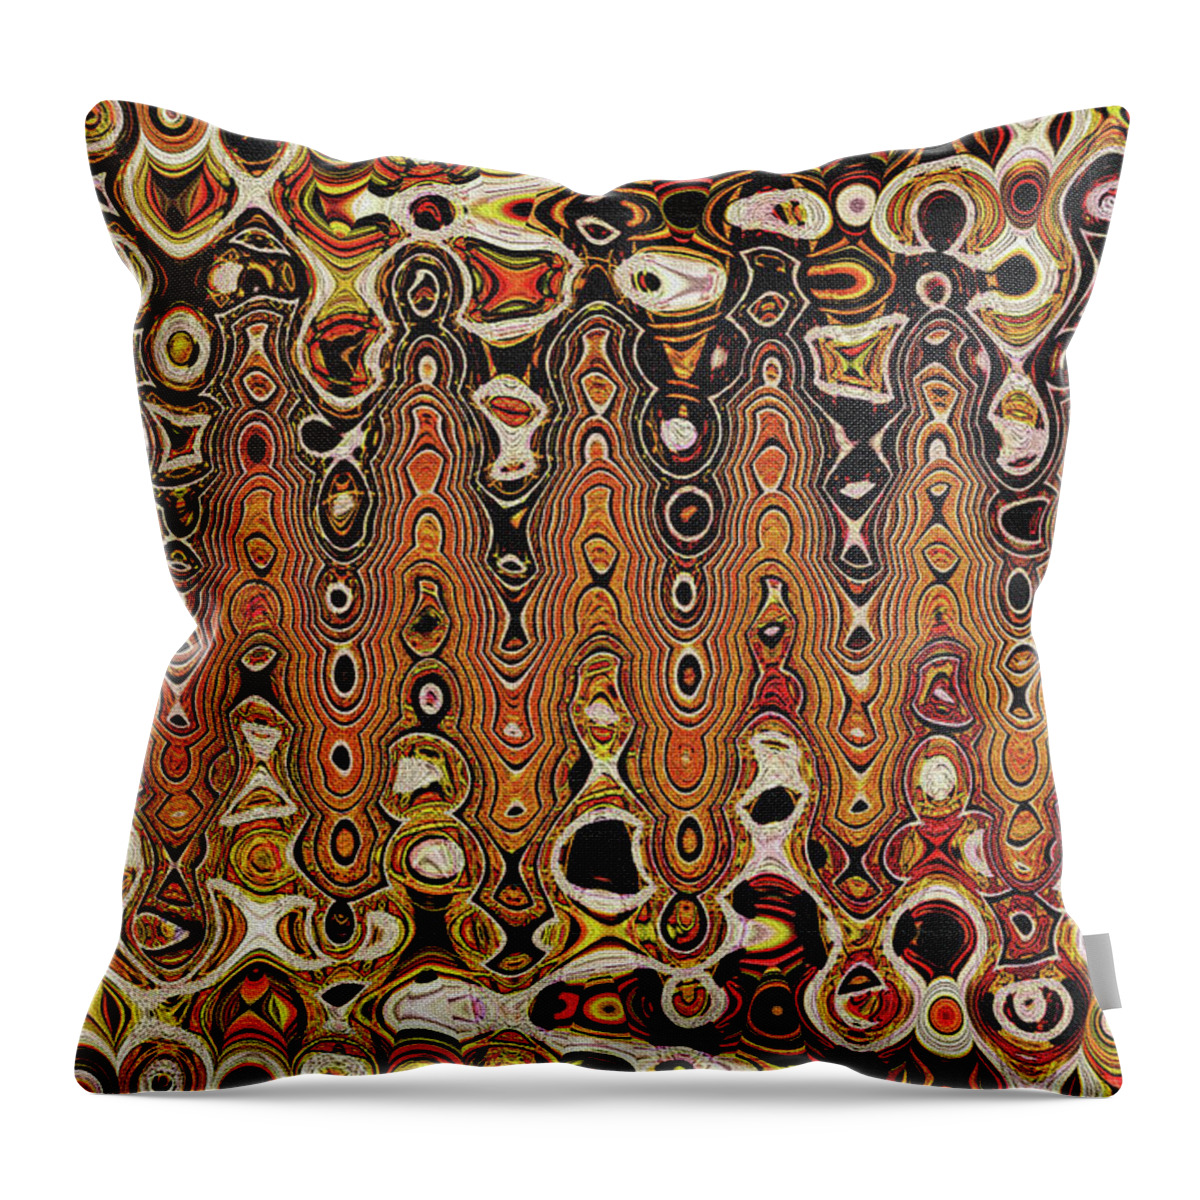 Tom Stanley Janca Throw Pillow featuring the digital art Tom Stanley Janca Abstract Design #5766p6abt by Tom Janca